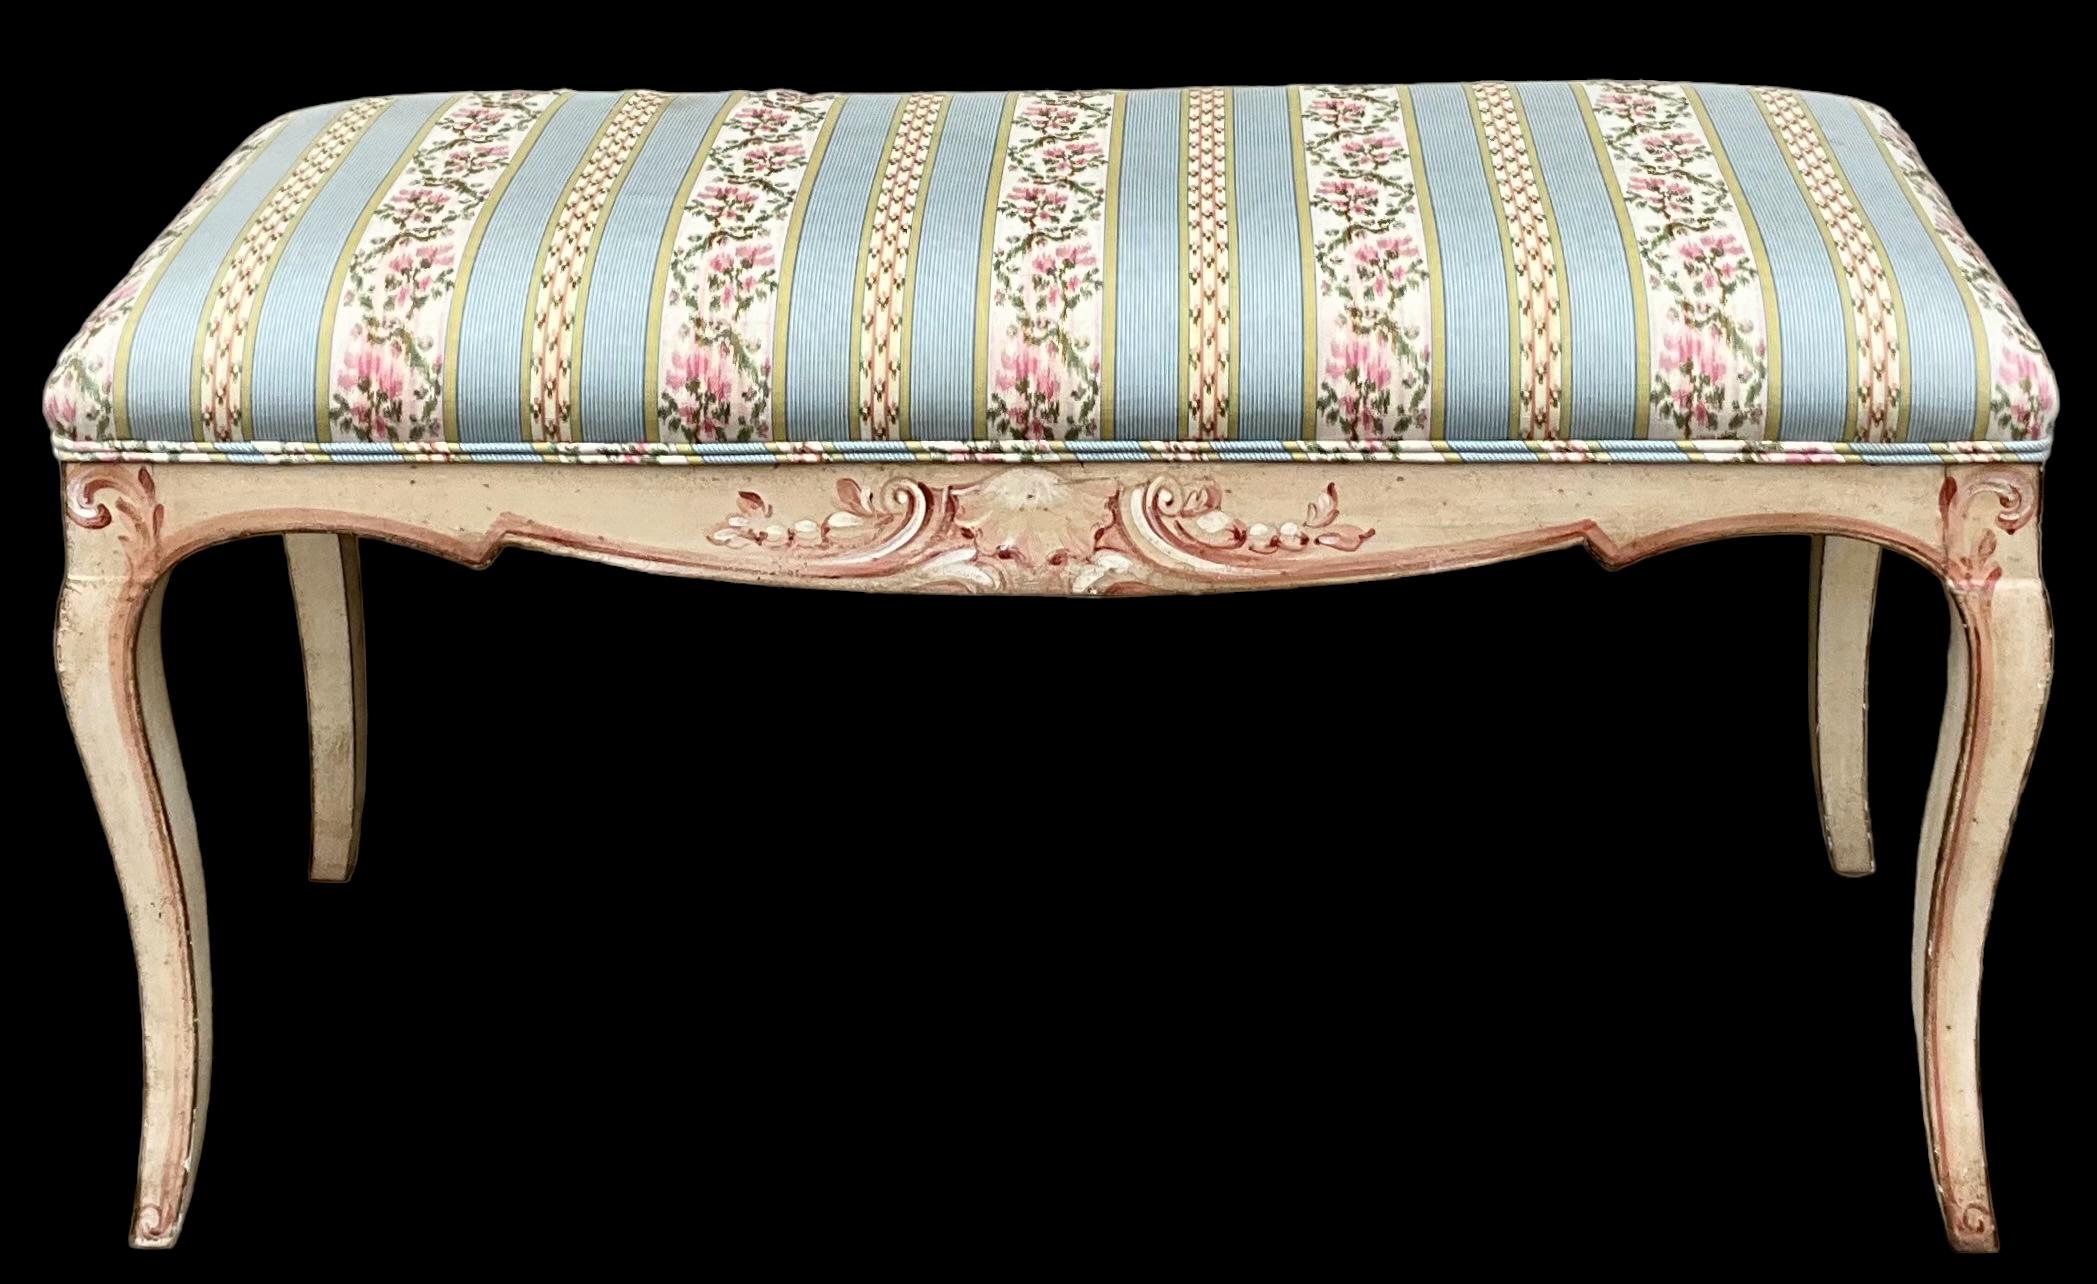 20th Century 1960s Carved And Painted Italian Bench / Ottoman In Striped Floral Chintz  For Sale